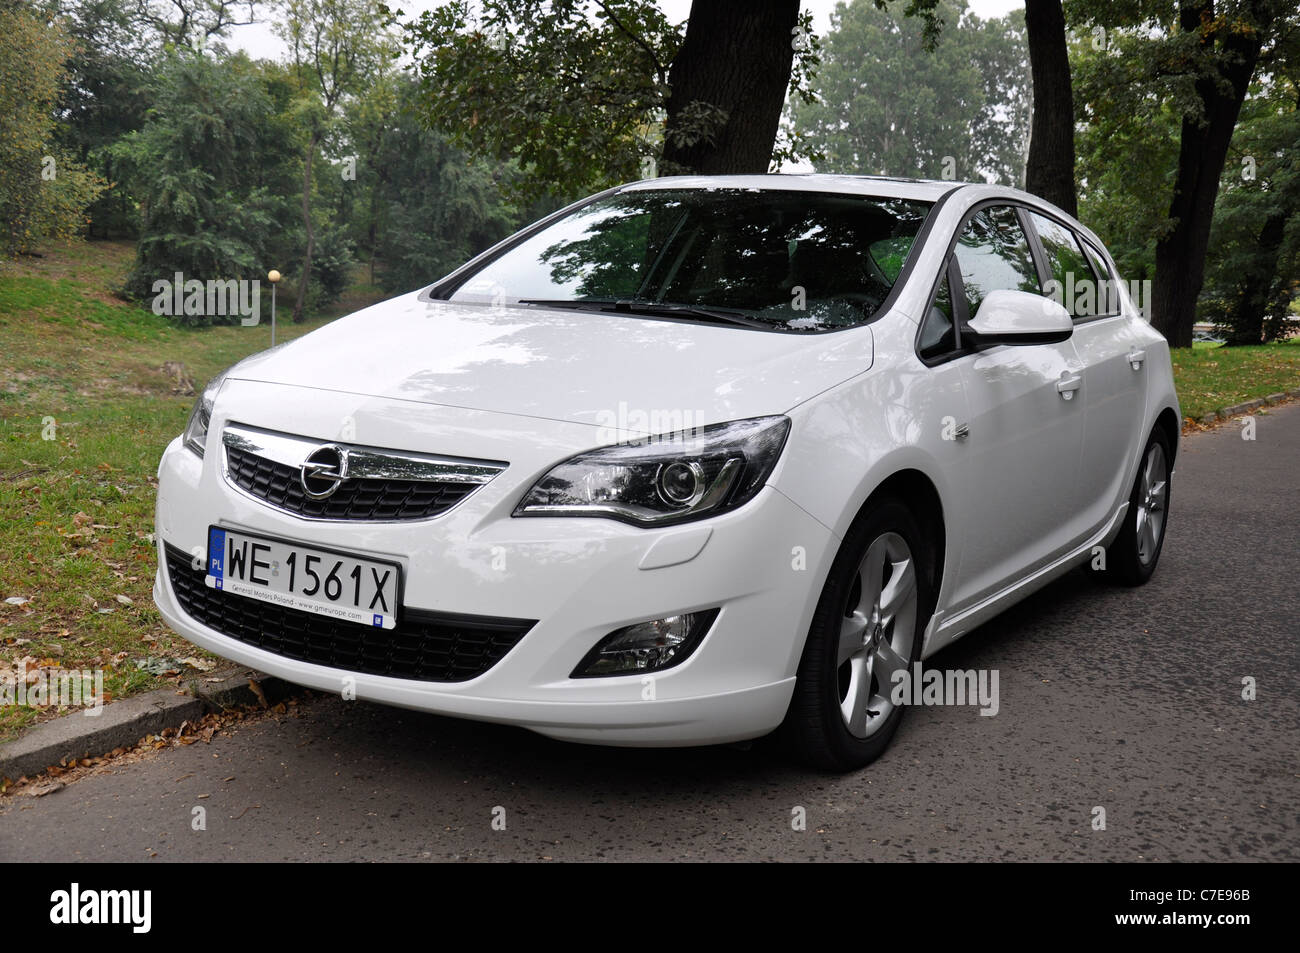 Opel Astra IV 1.4 Turbo - MY 2009 - white - German compact car, segment C - in a park Stock Photo